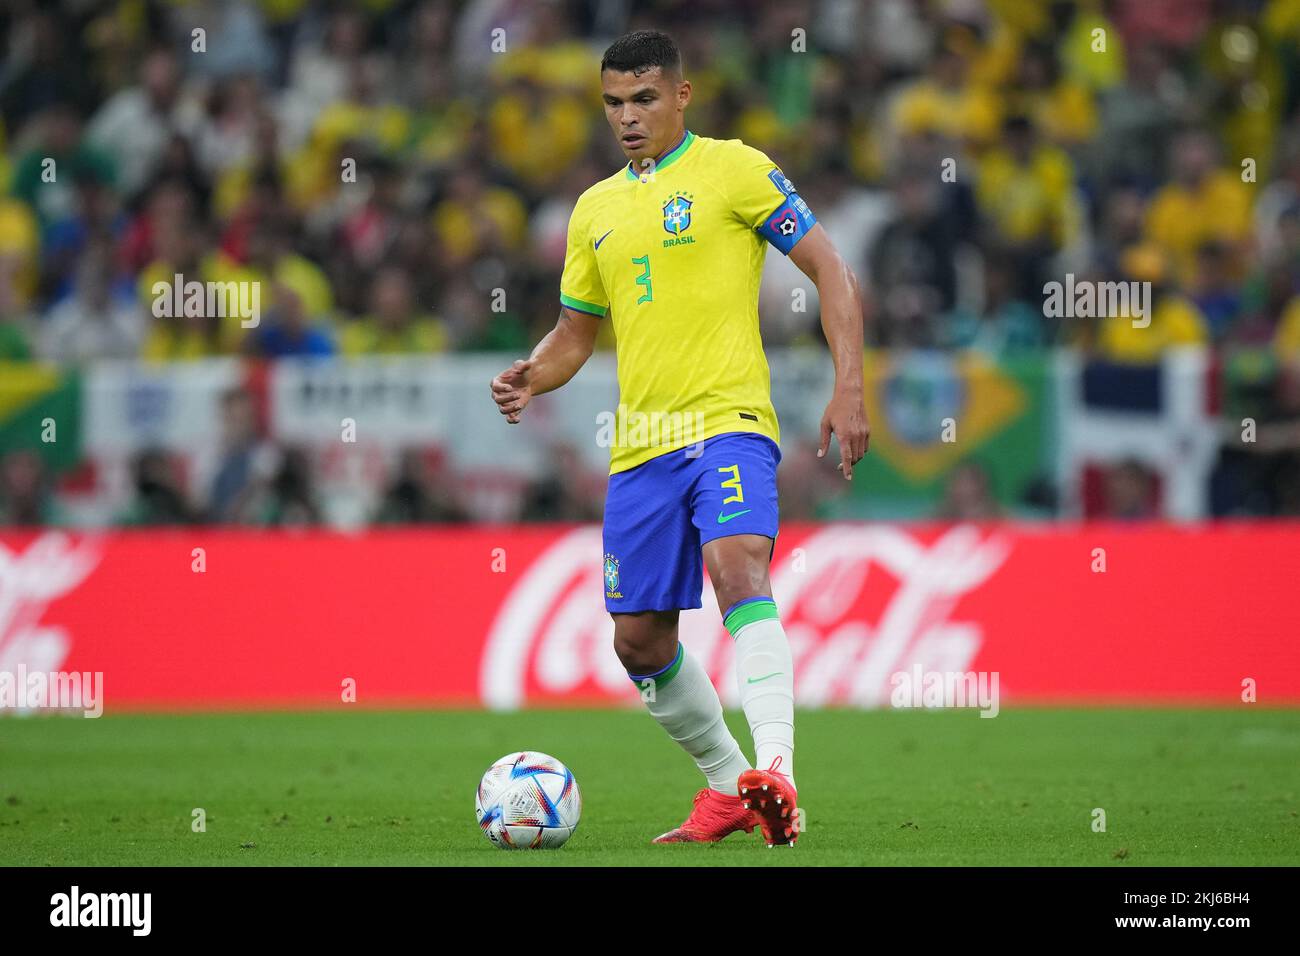 Thiago Silva of Brazil during the FIFA World Cup Qatar 2022 match, Group G, between Brazil and Serbia played at Lusail Stadium on Nov 24, 2022 in Lusail, Qatar. (Photo by Bagu Blanco / PRESSIN) Credit: PRESSINPHOTO SPORTS AGENCY/Alamy Live News Stock Photo